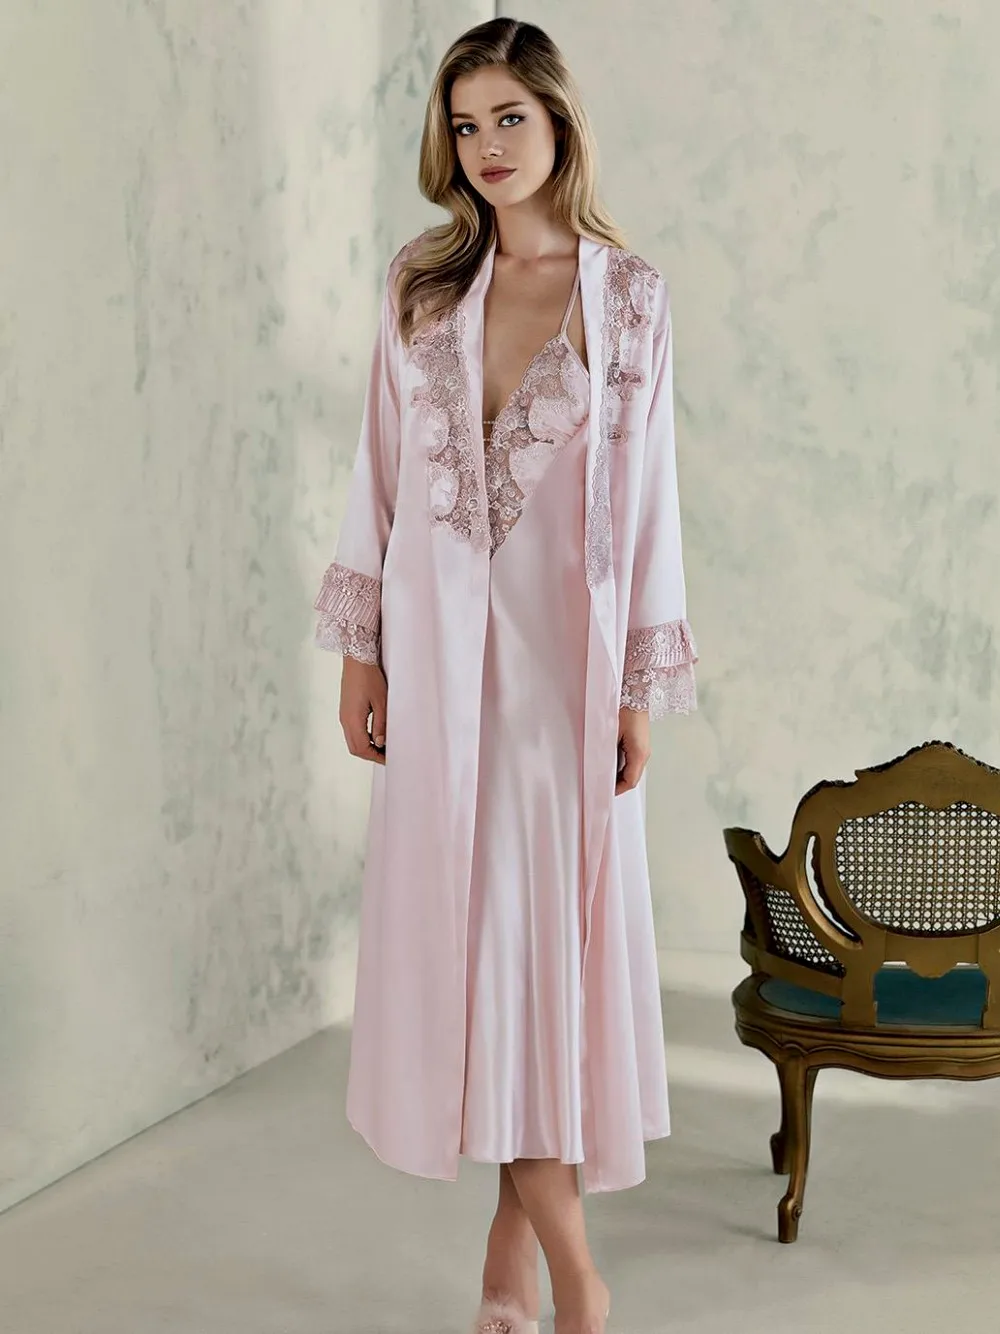 long silk nightgowns and robes sets